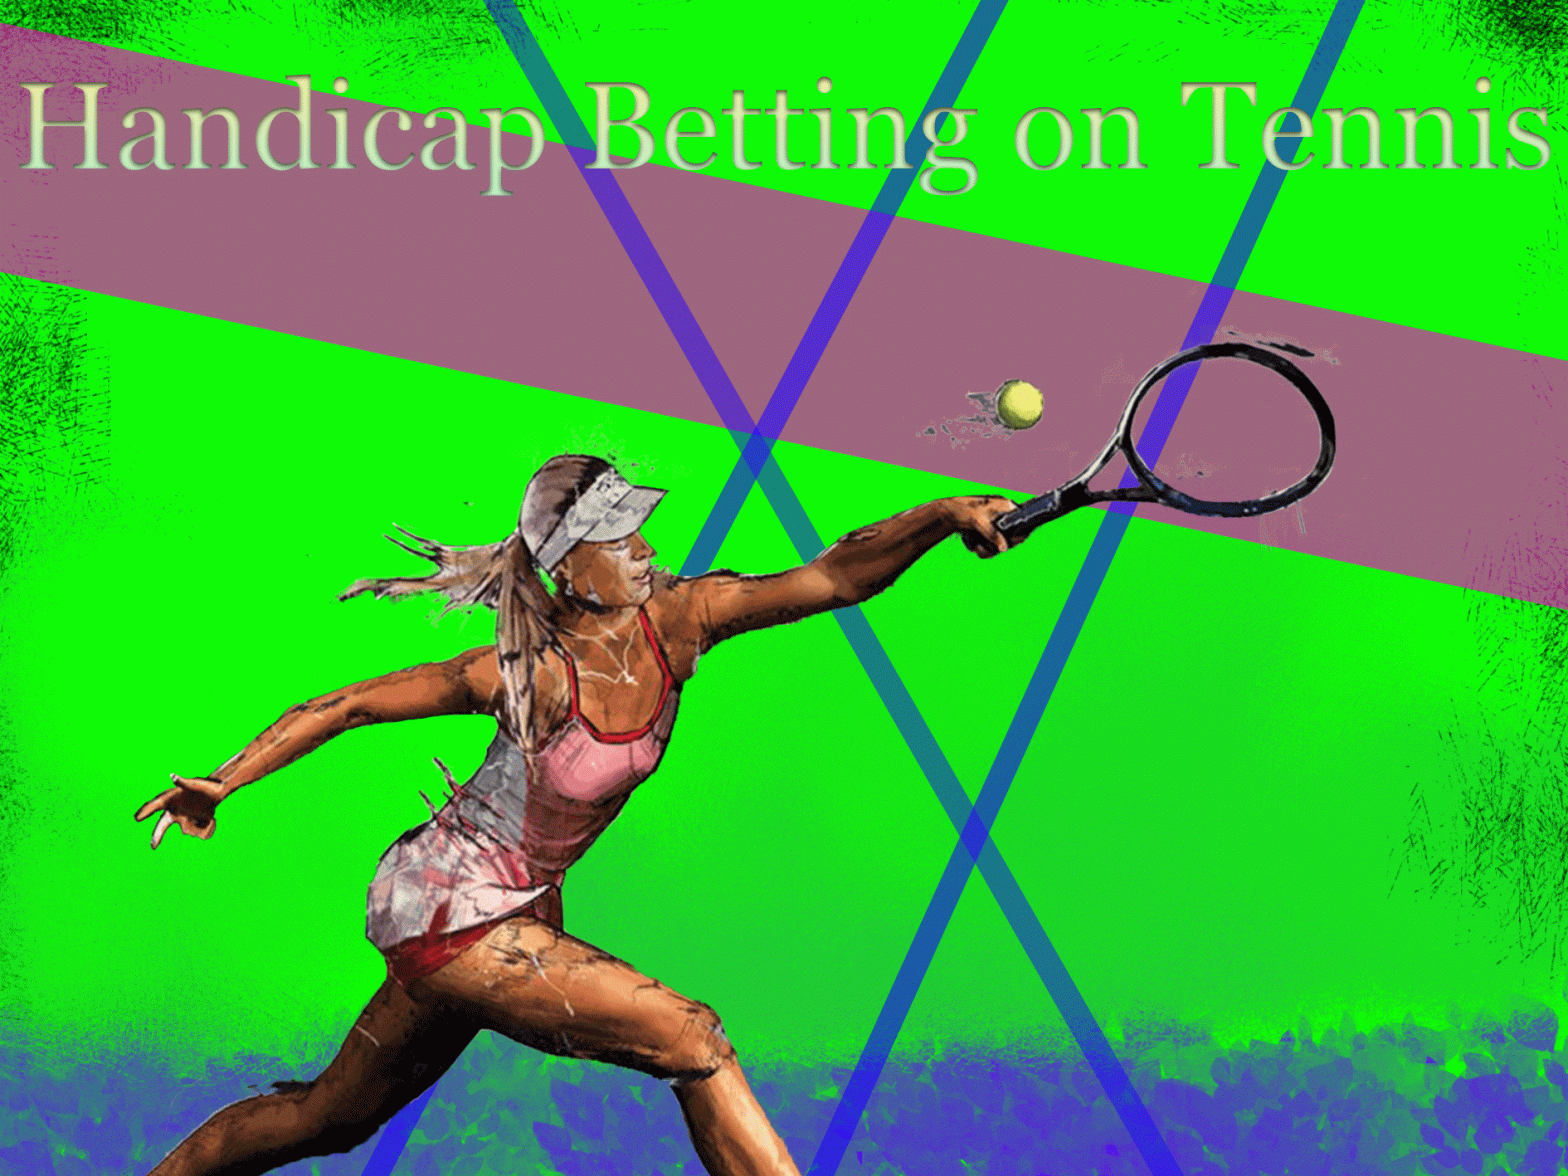 bets on various popular tennis events